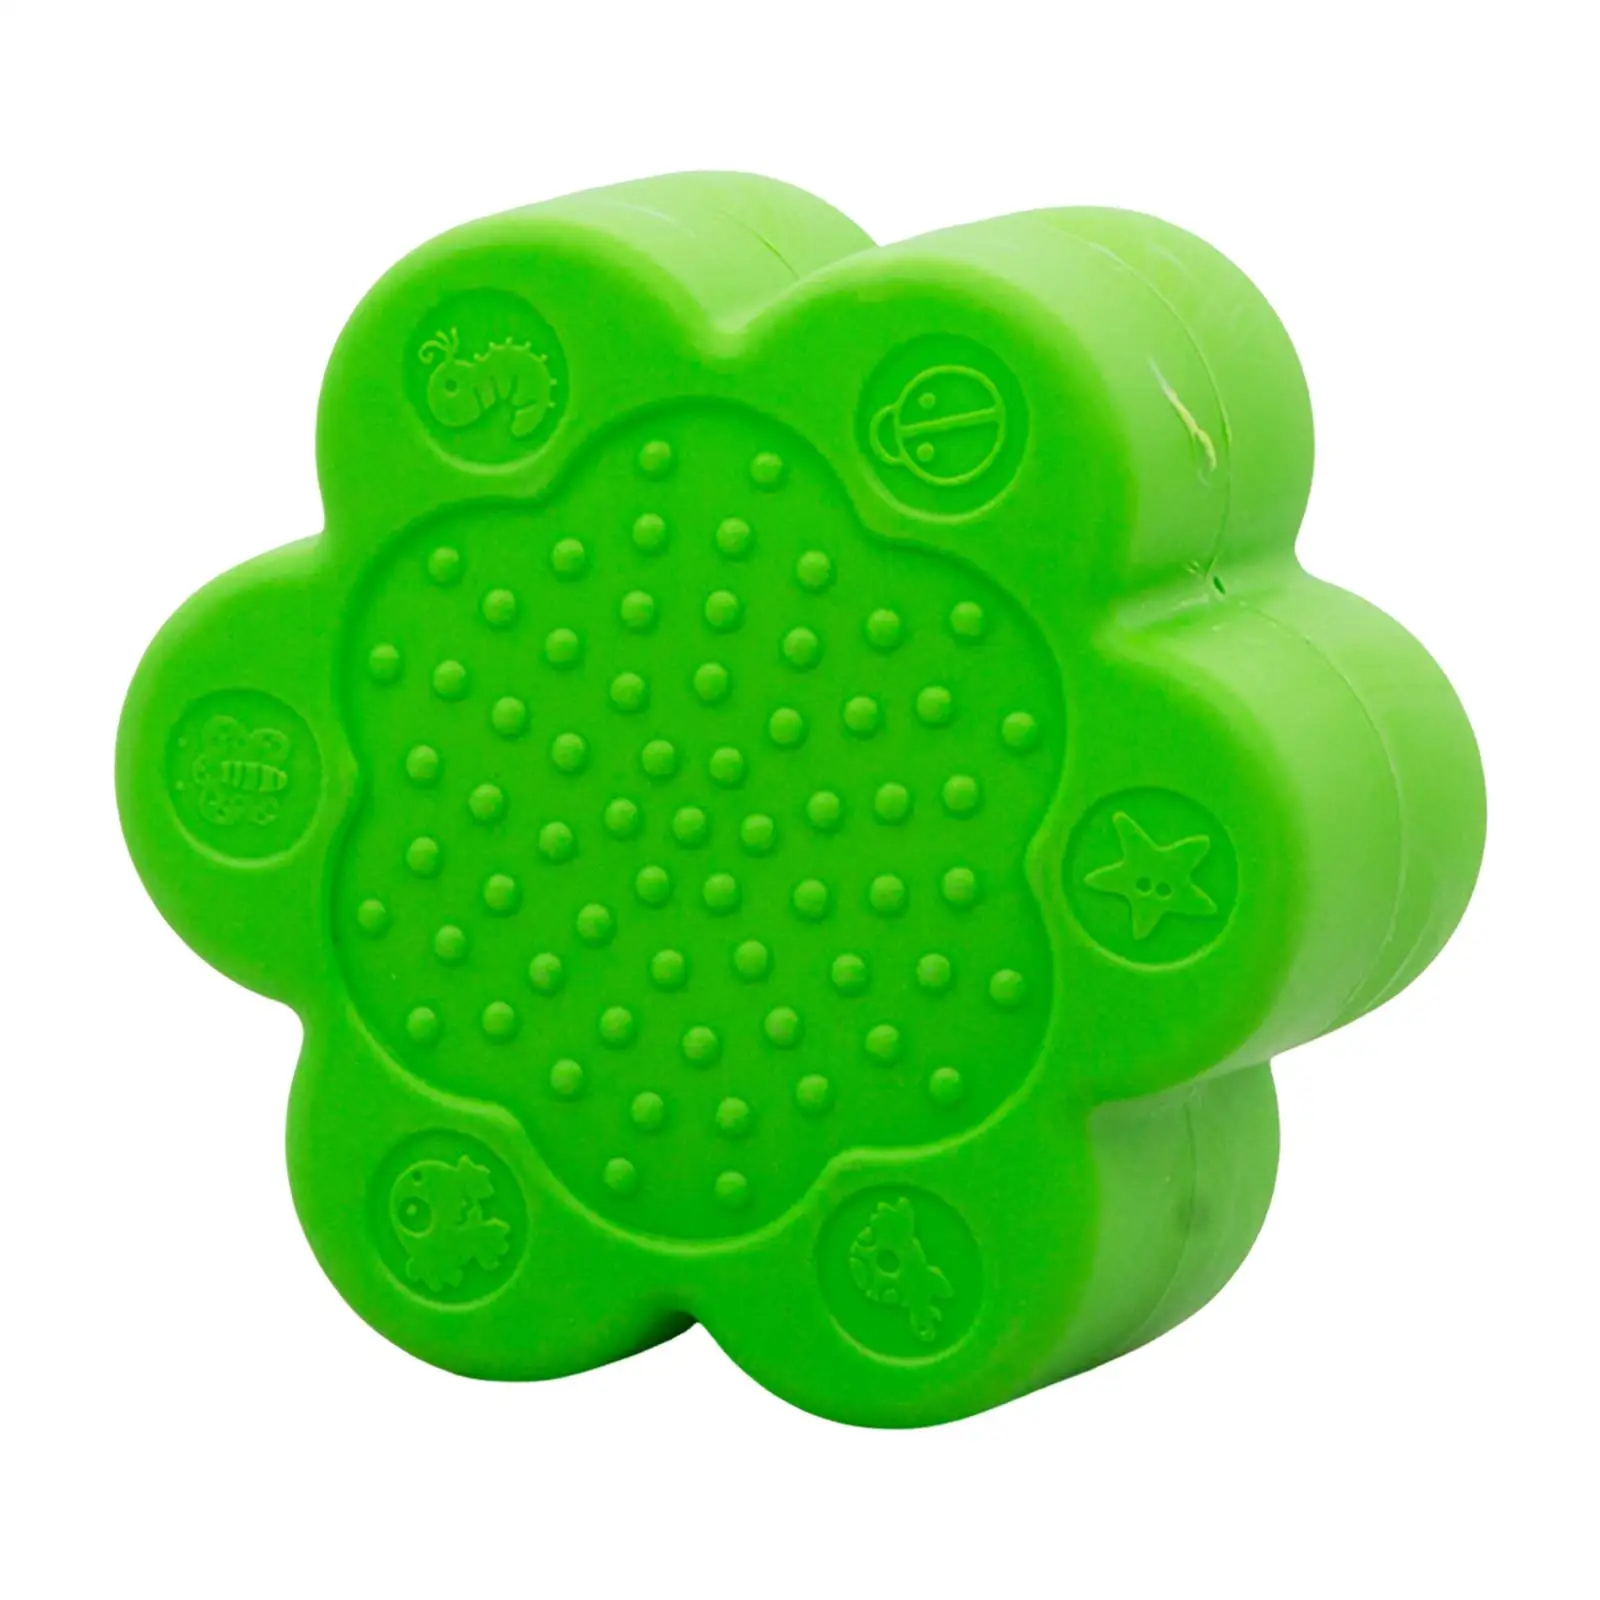 Balance Stepping Stone Coordination Game Child Jump Stones Anti Slip Crossing River Stones Stacking Toy for Preschool Toy